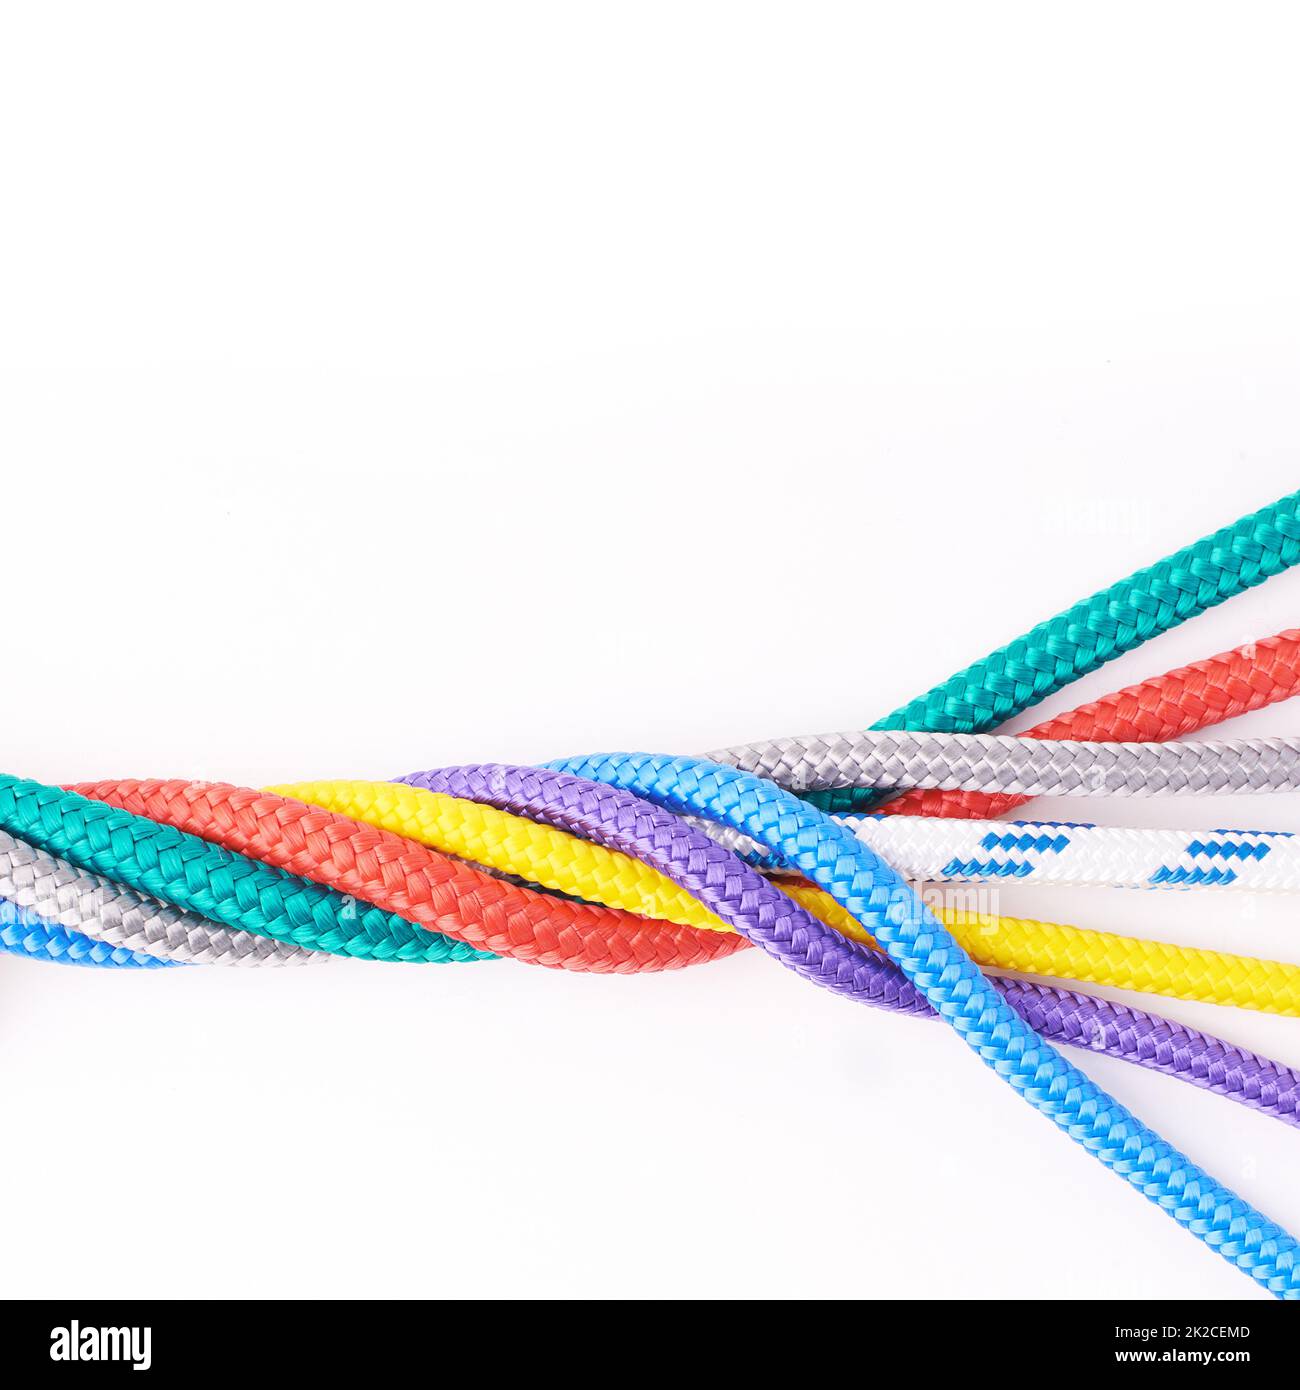 Colorful cords. Studio shot ropes knotted together isolated on white. Stock Photo